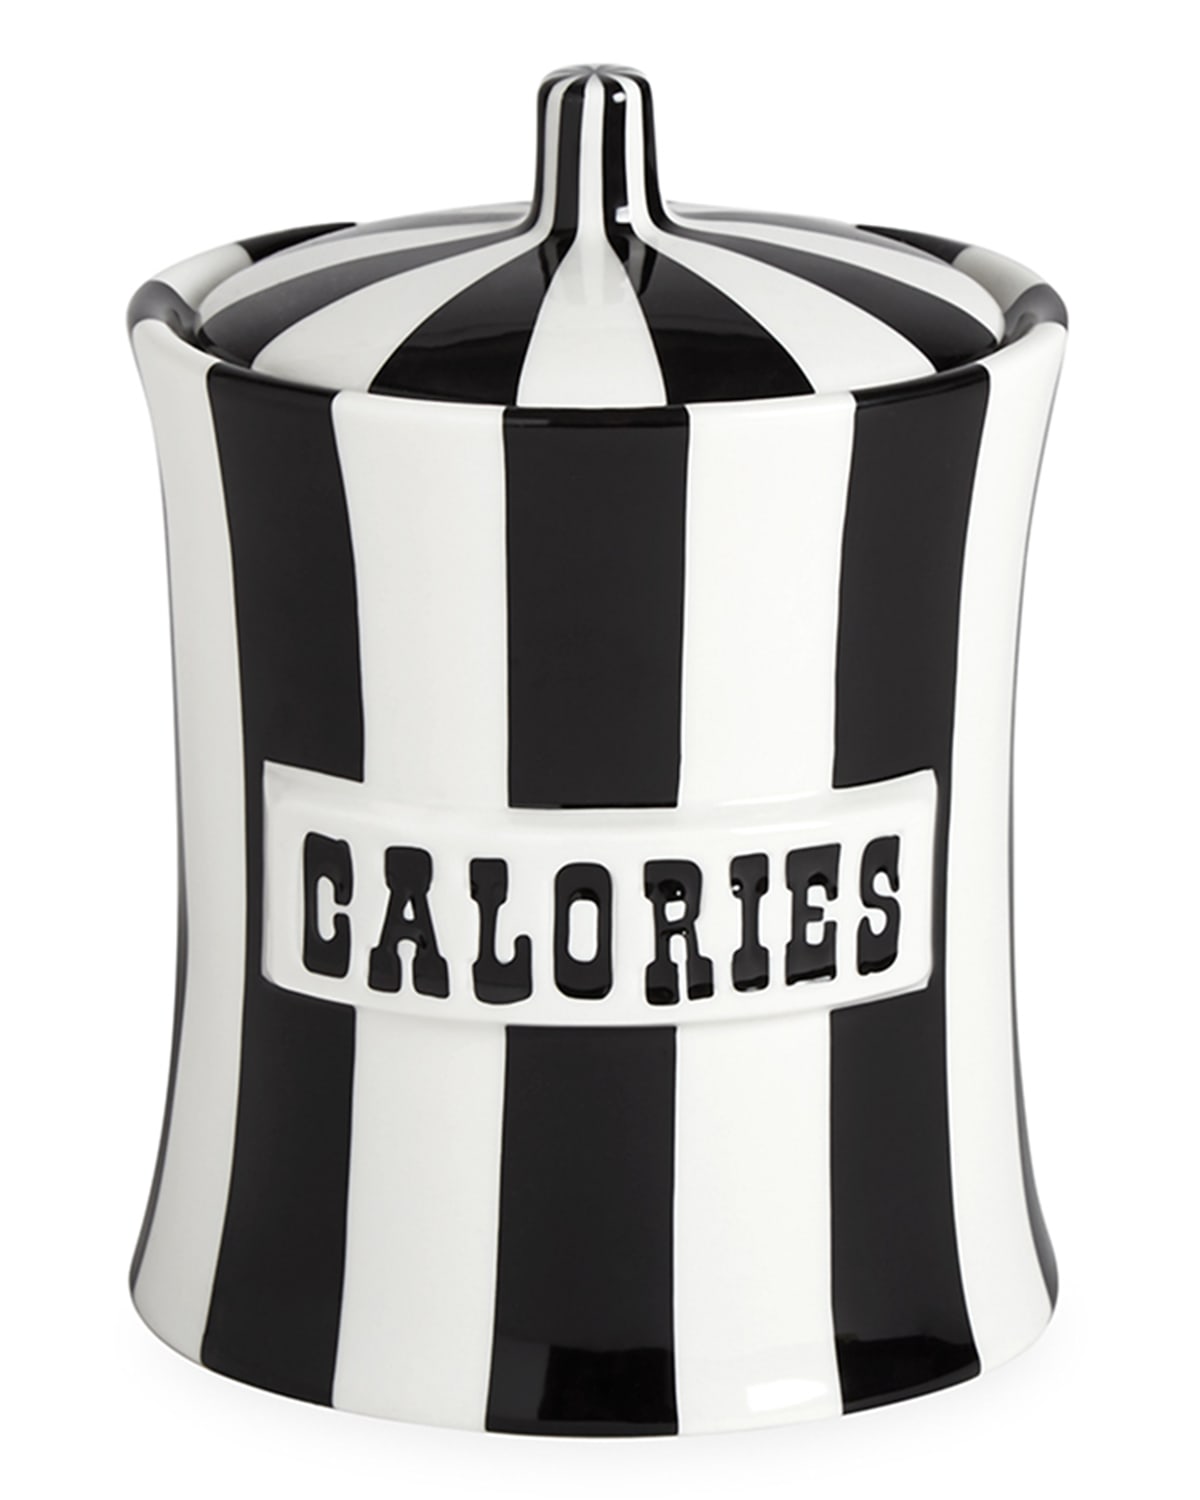 Jonathan Adler Vice Calories Canister In Black/white